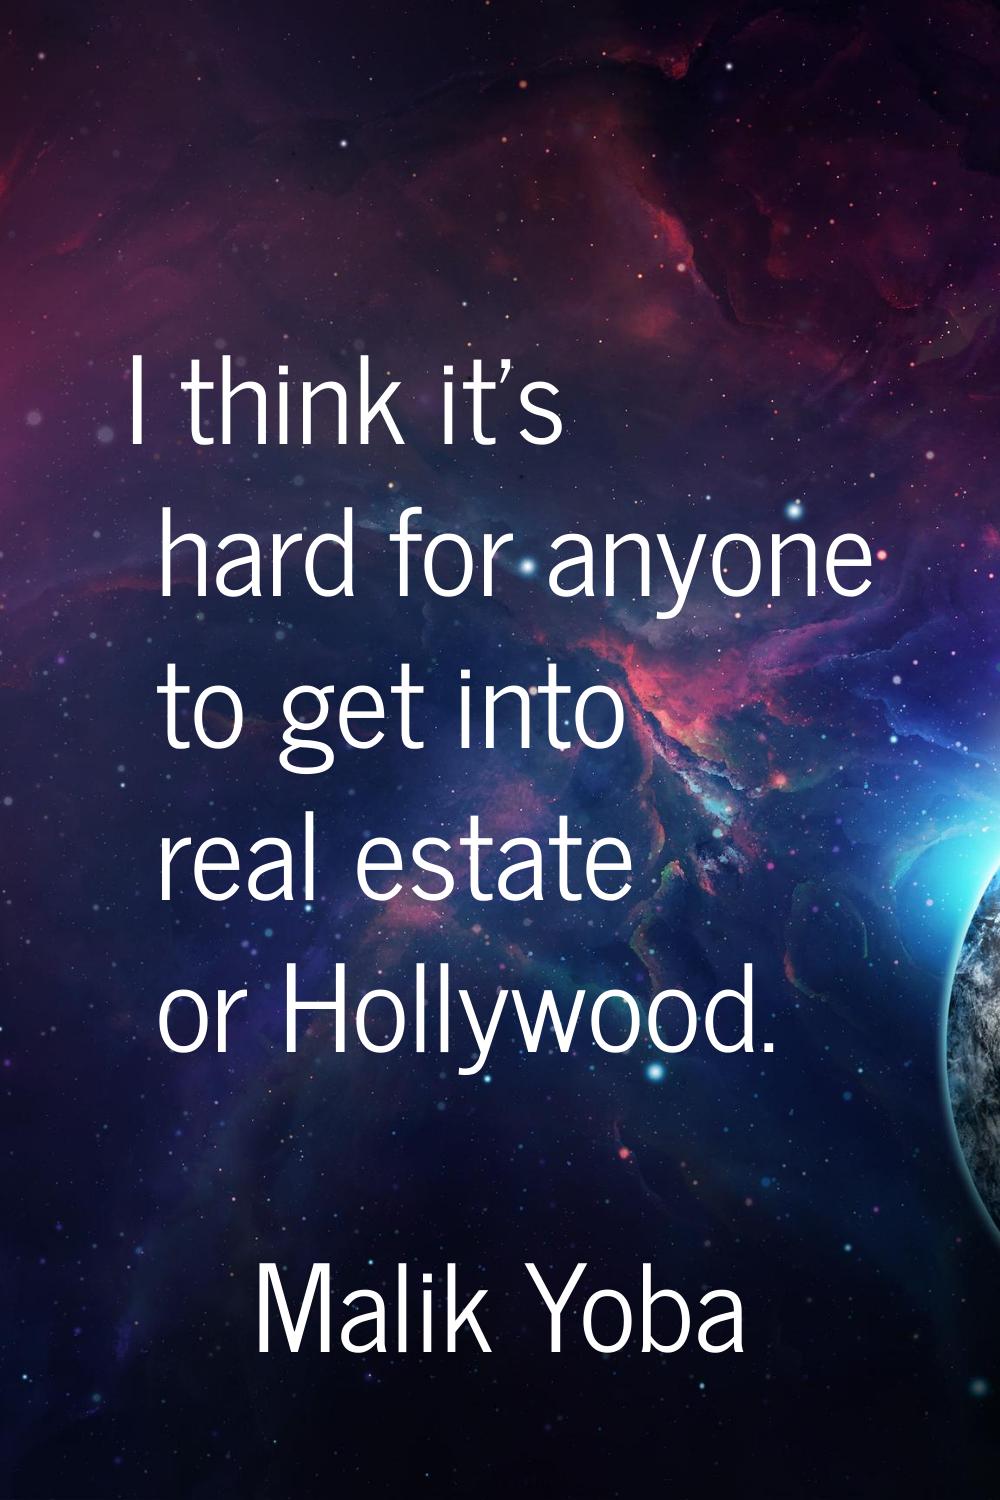 I think it's hard for anyone to get into real estate or Hollywood.